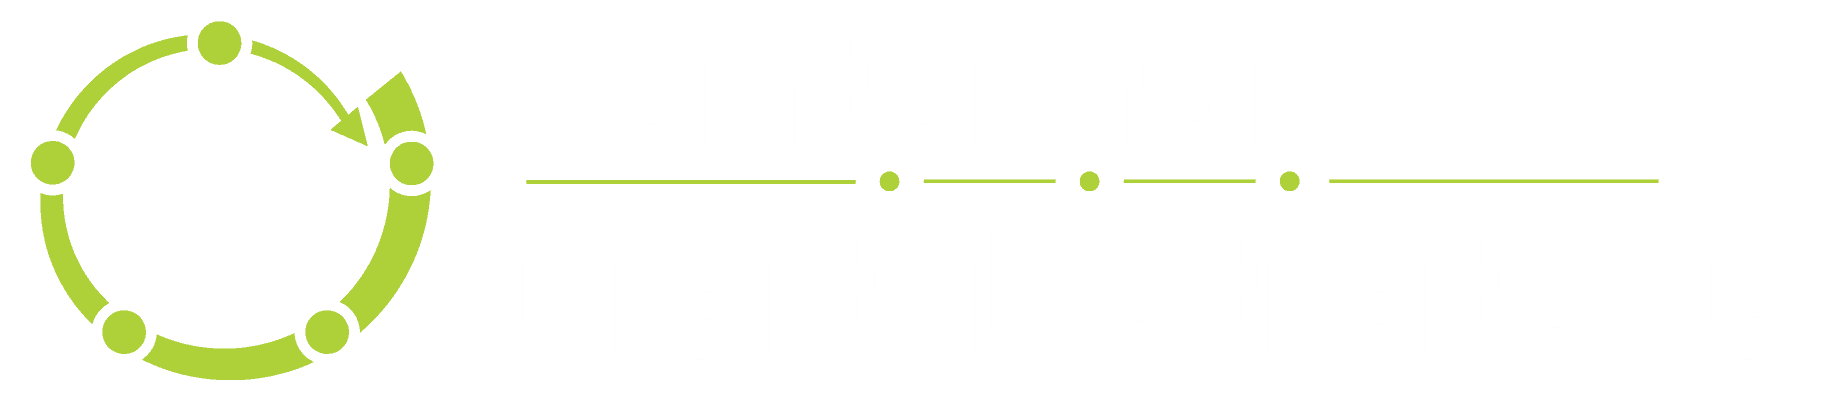 Center for Digital Strategy